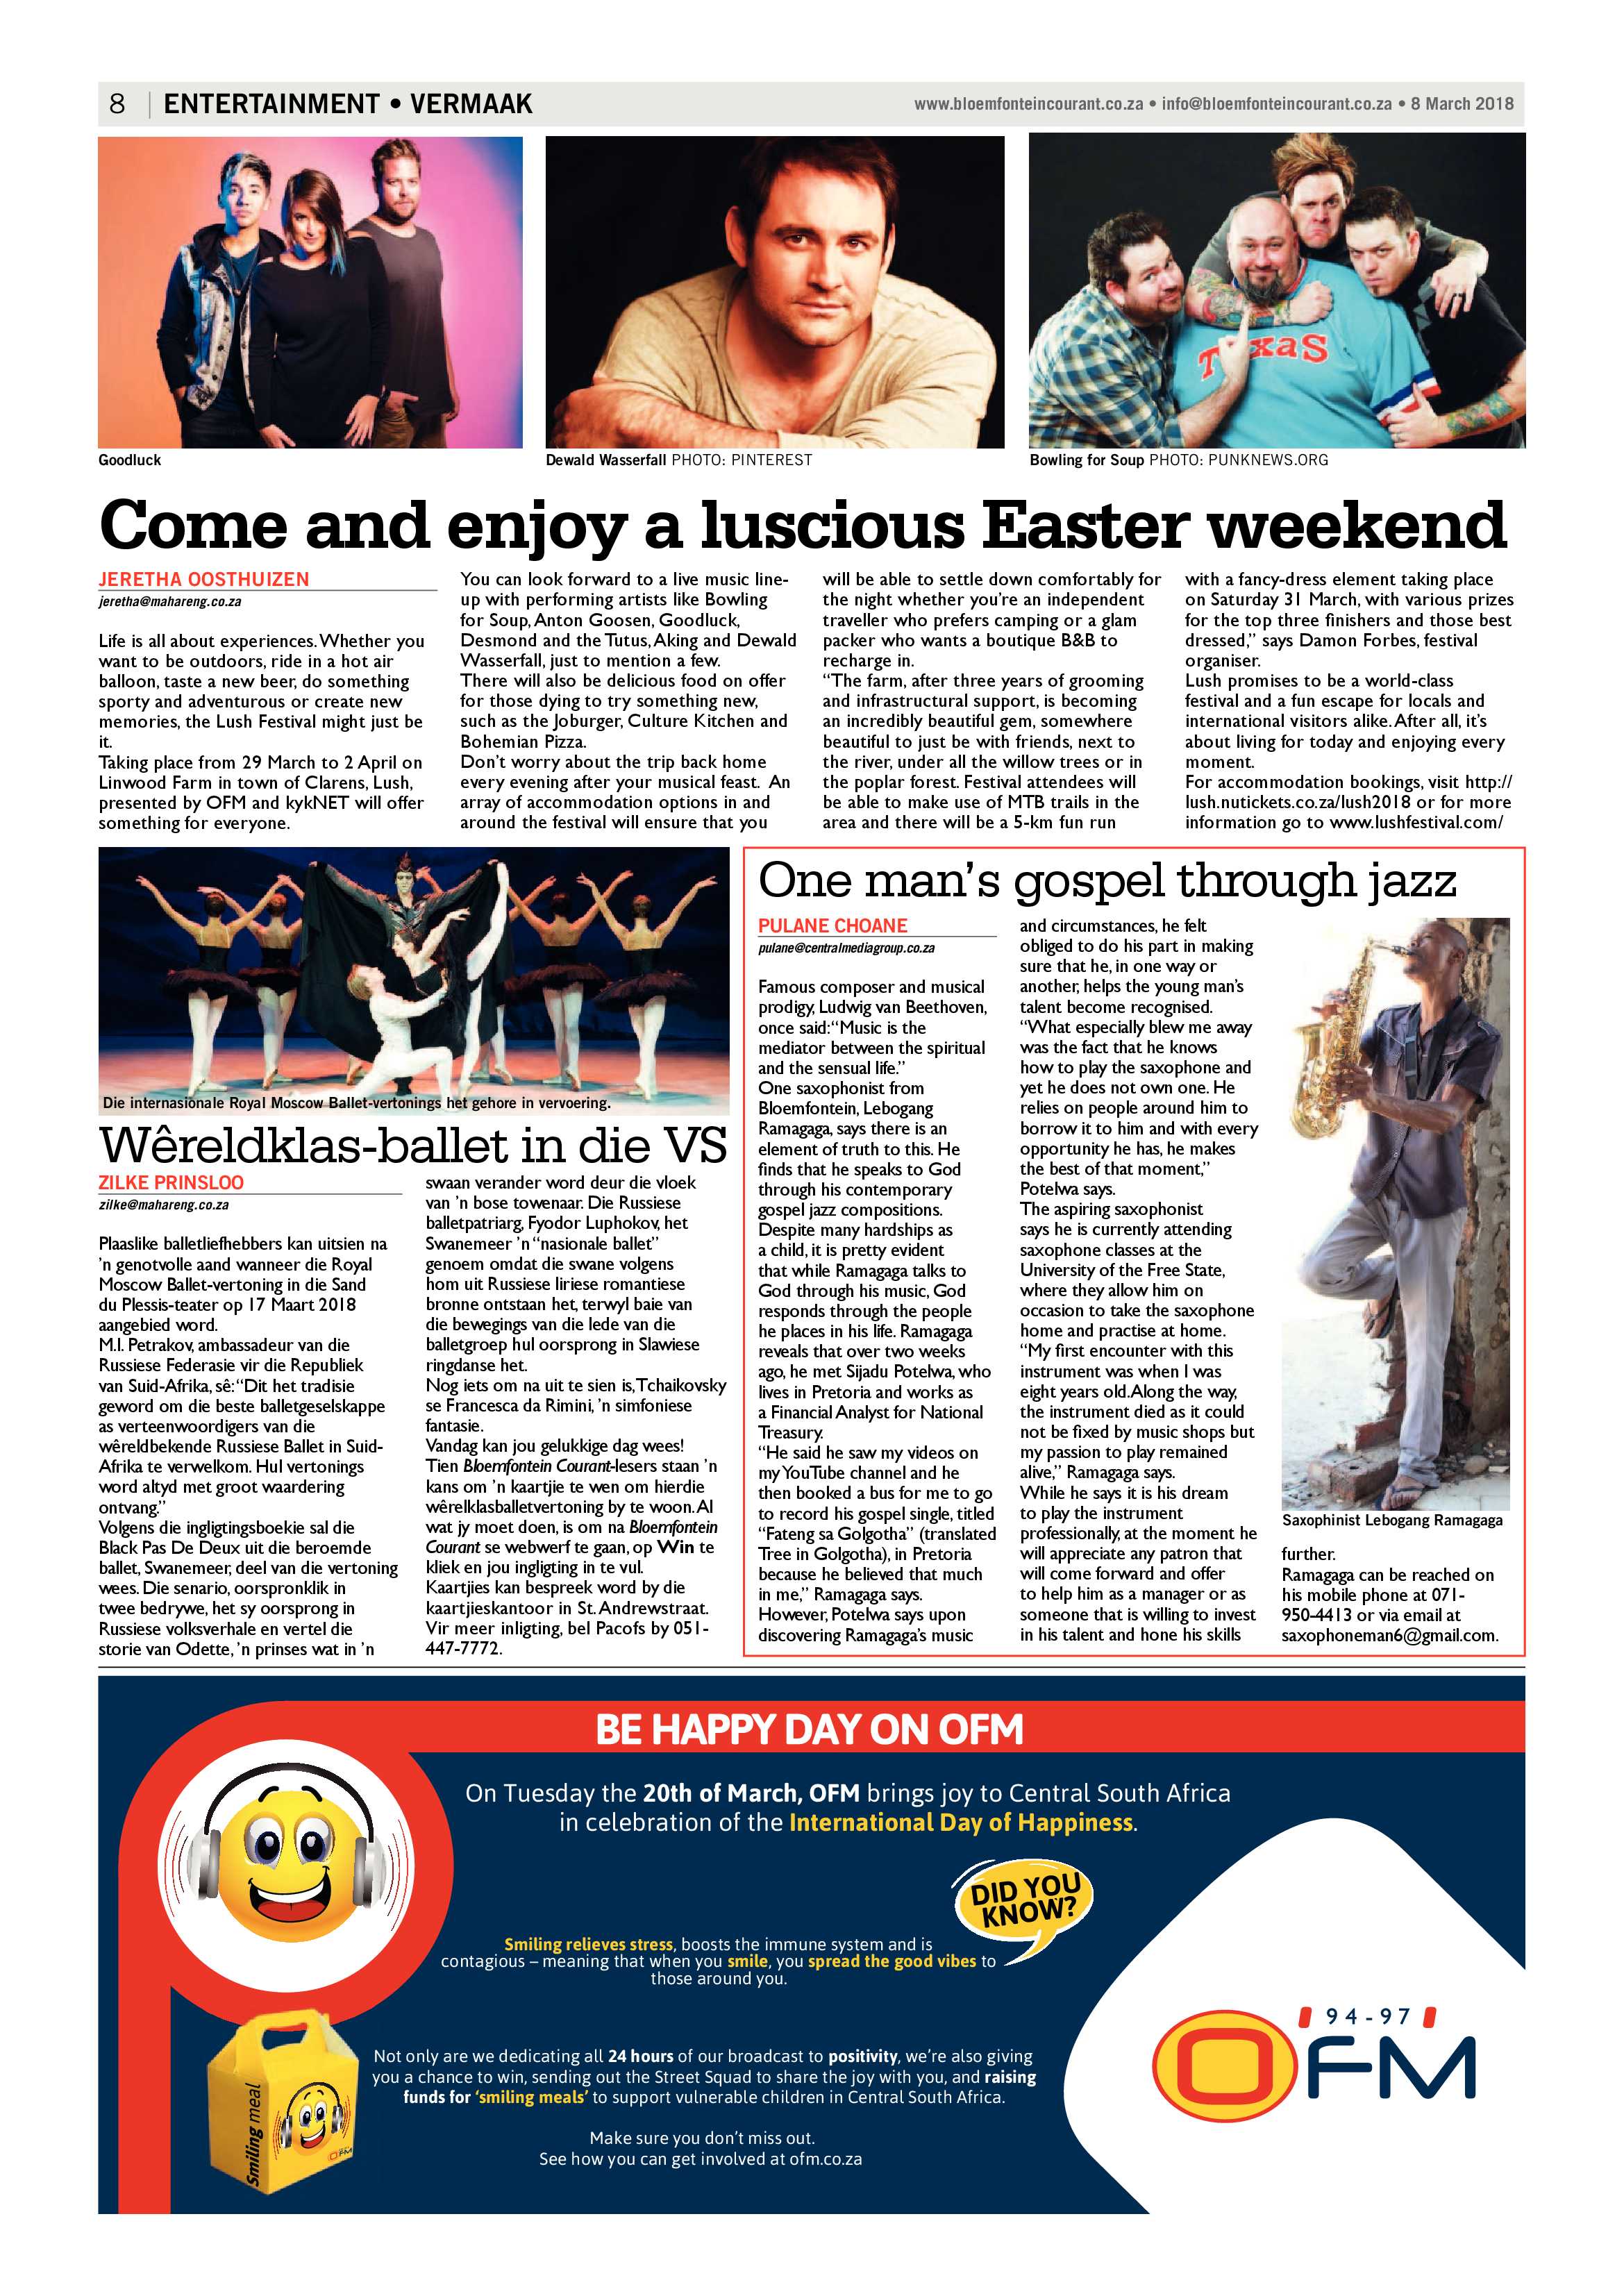 8-march-2018-bloemfontein-courant-epapers-page-8